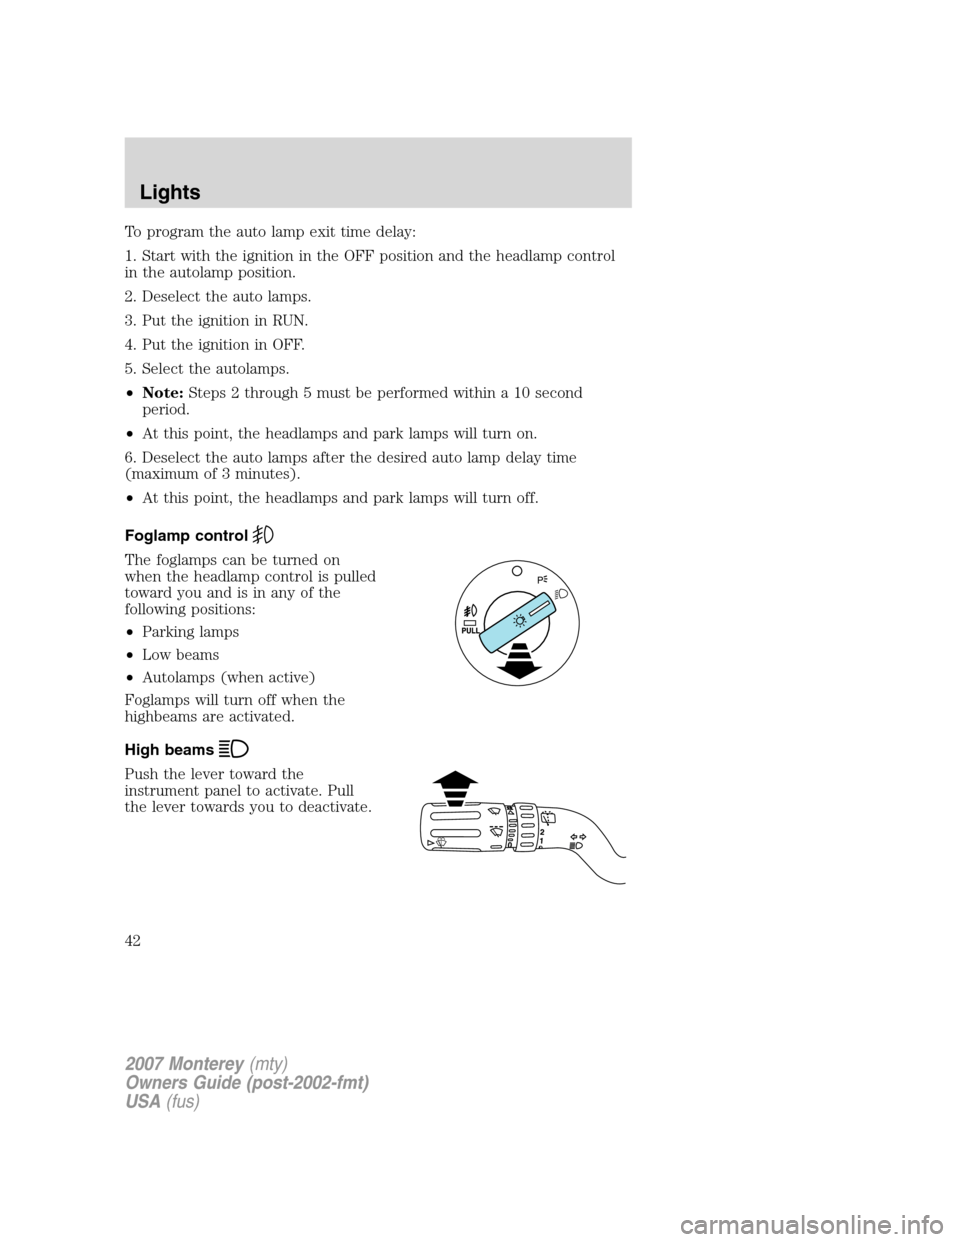 Mercury Monterey 2007  s Service Manual To program the auto lamp exit time delay:
1. Start with the ignition in the OFF position and the headlamp control
in the autolamp position.
2. Deselect the auto lamps.
3. Put the ignition in RUN.
4. P